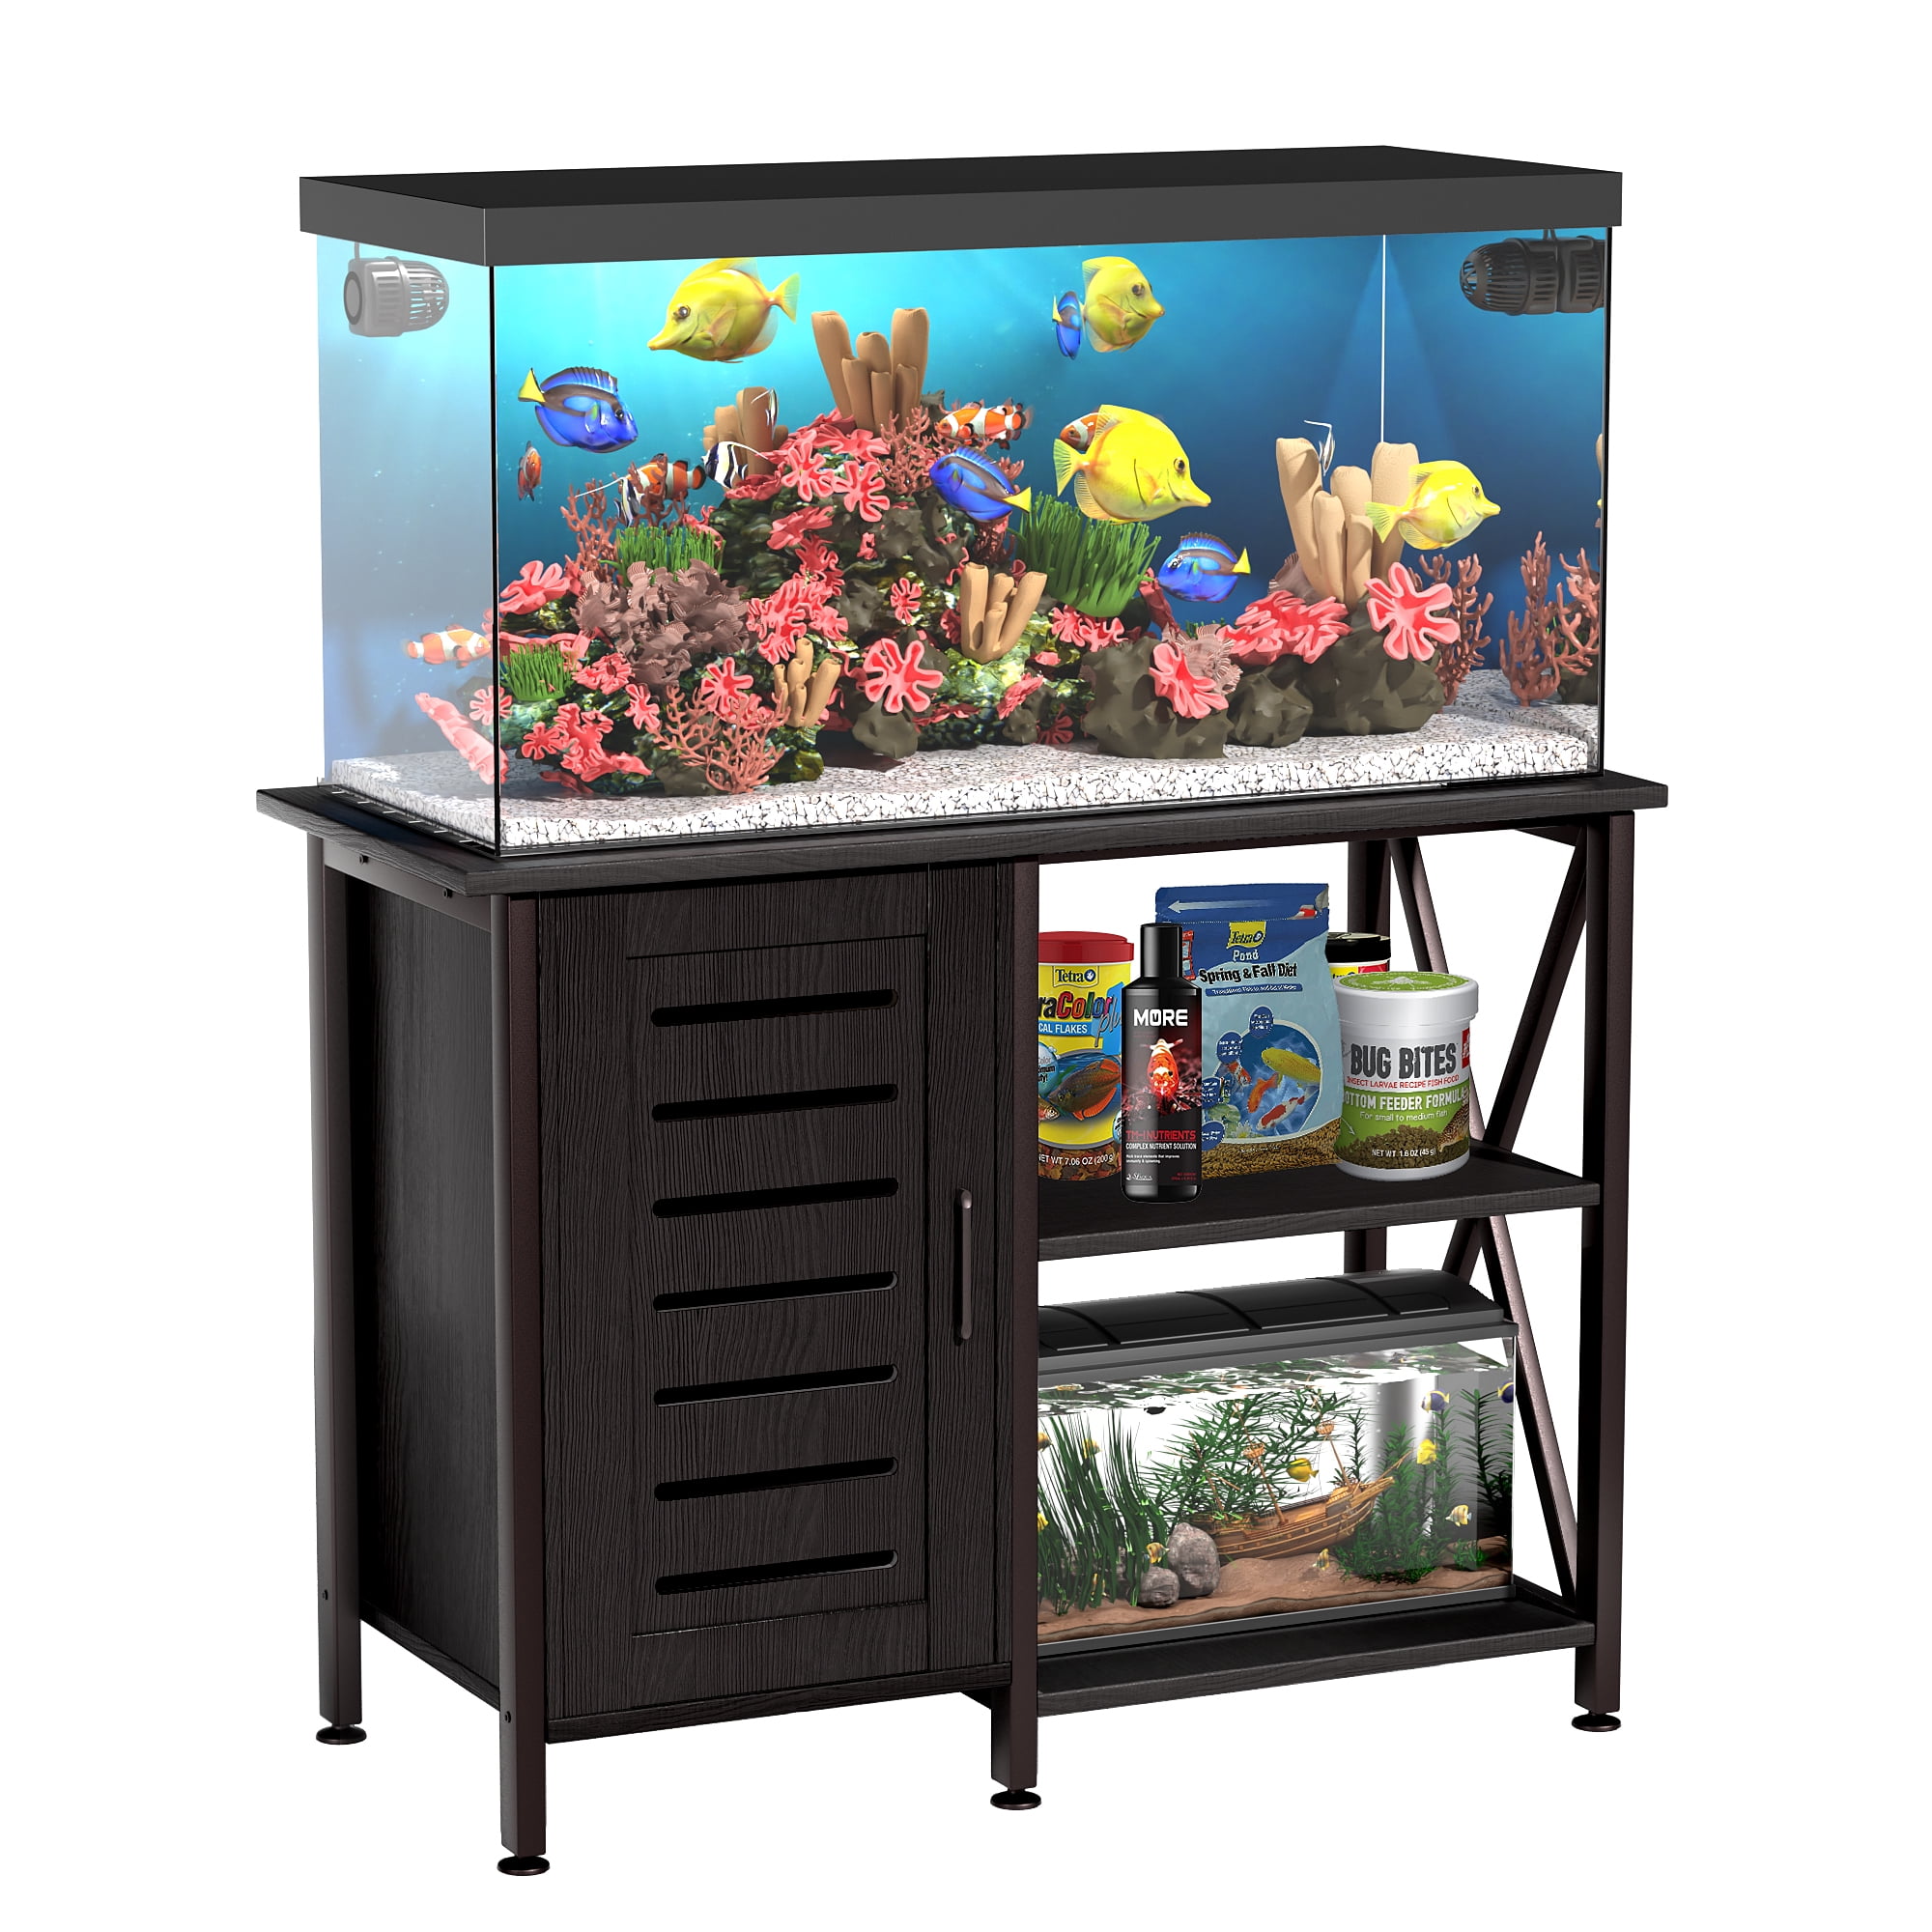 Herture Fish Tank Stand with Cabinet, 40-50 Gallon Aquarium Stand